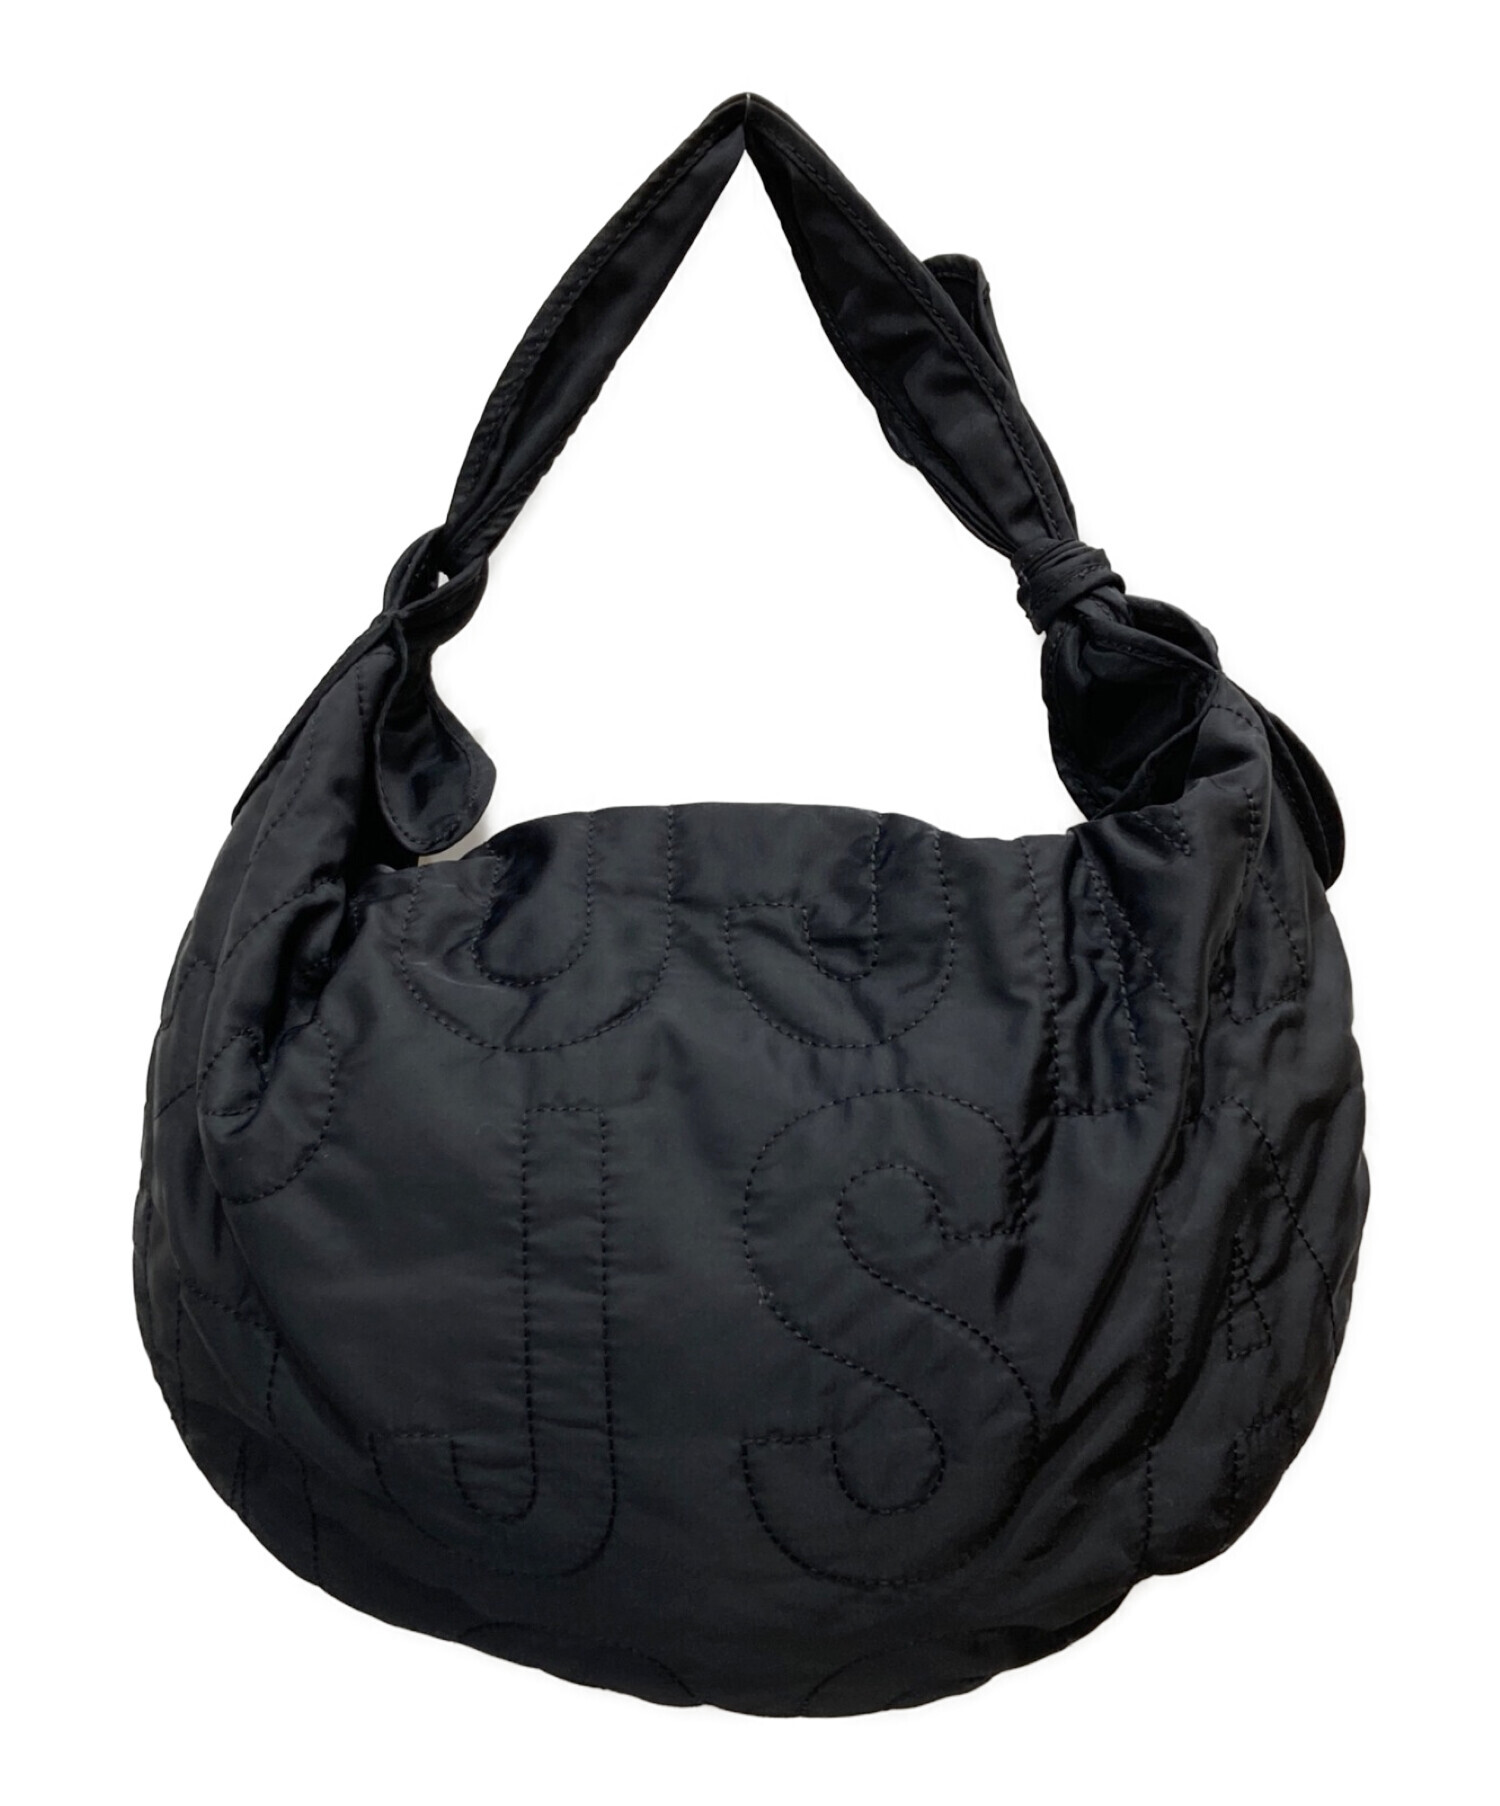 MARC BY MARC JACOBS◇ショルダーバッグ ナイロン BLK 無地 m3pe128 ...